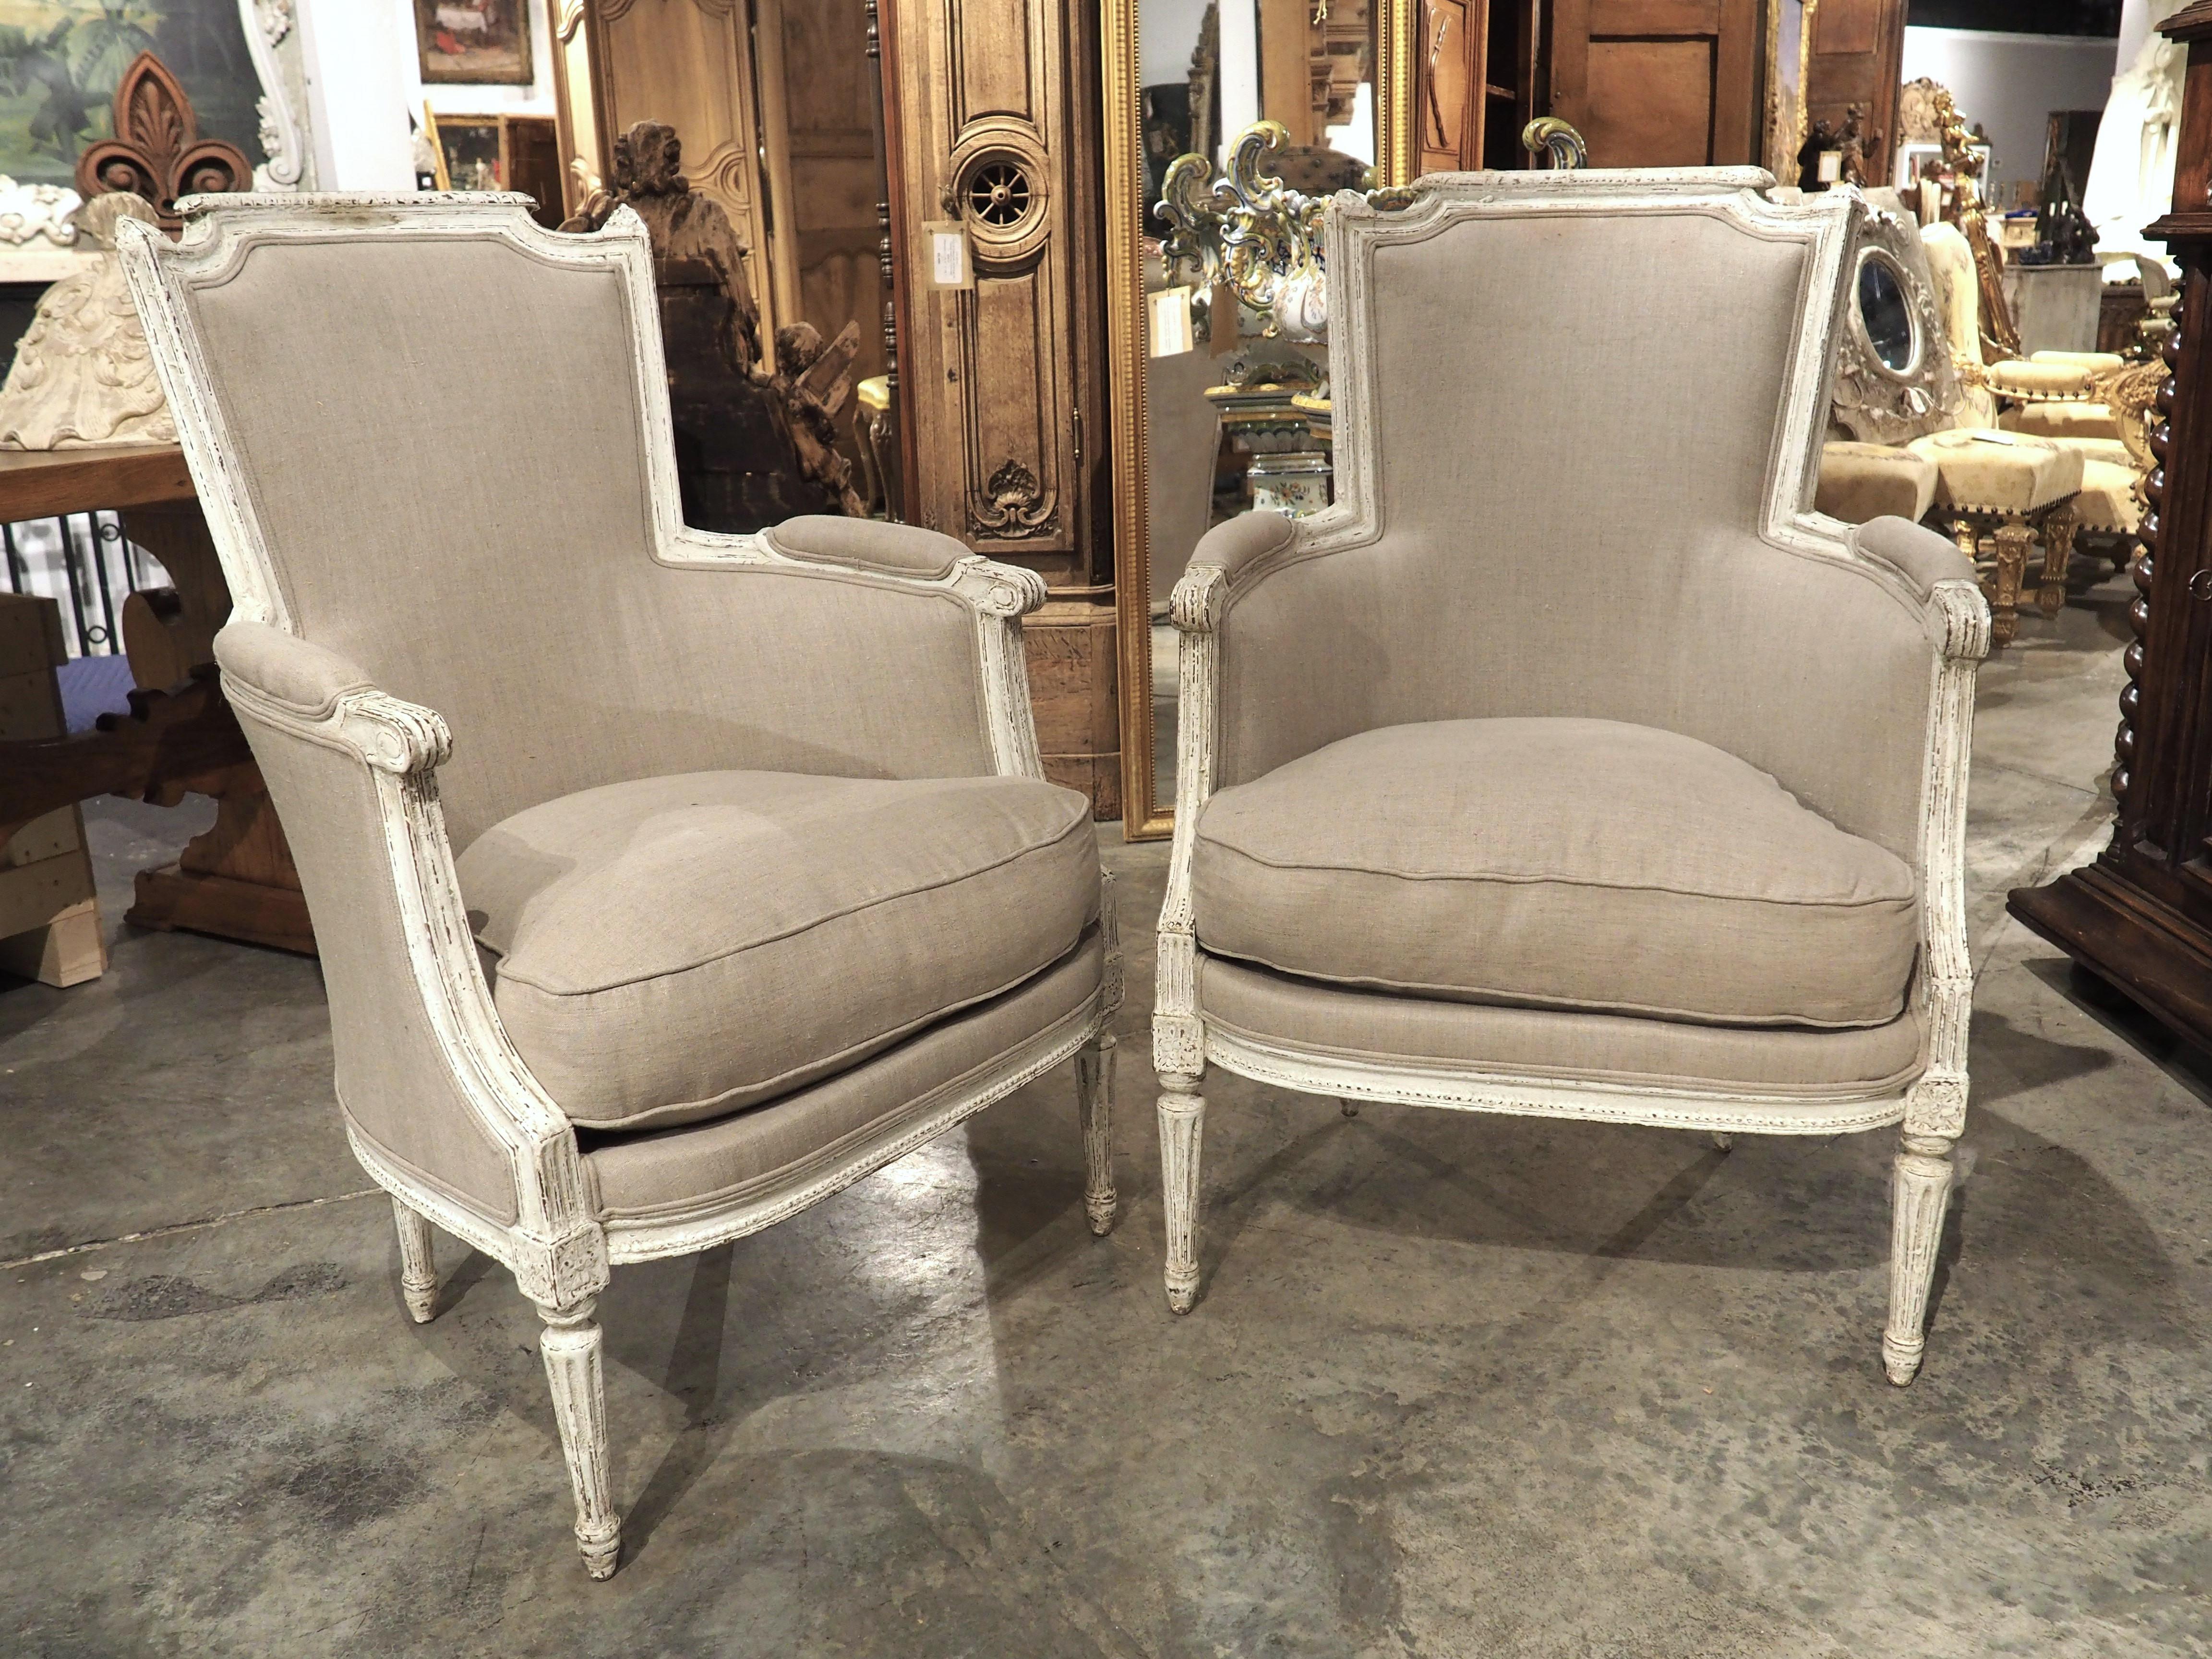 Pair of Antique French Painted Directoire Style Armchairs, Circa 1900 For Sale 12